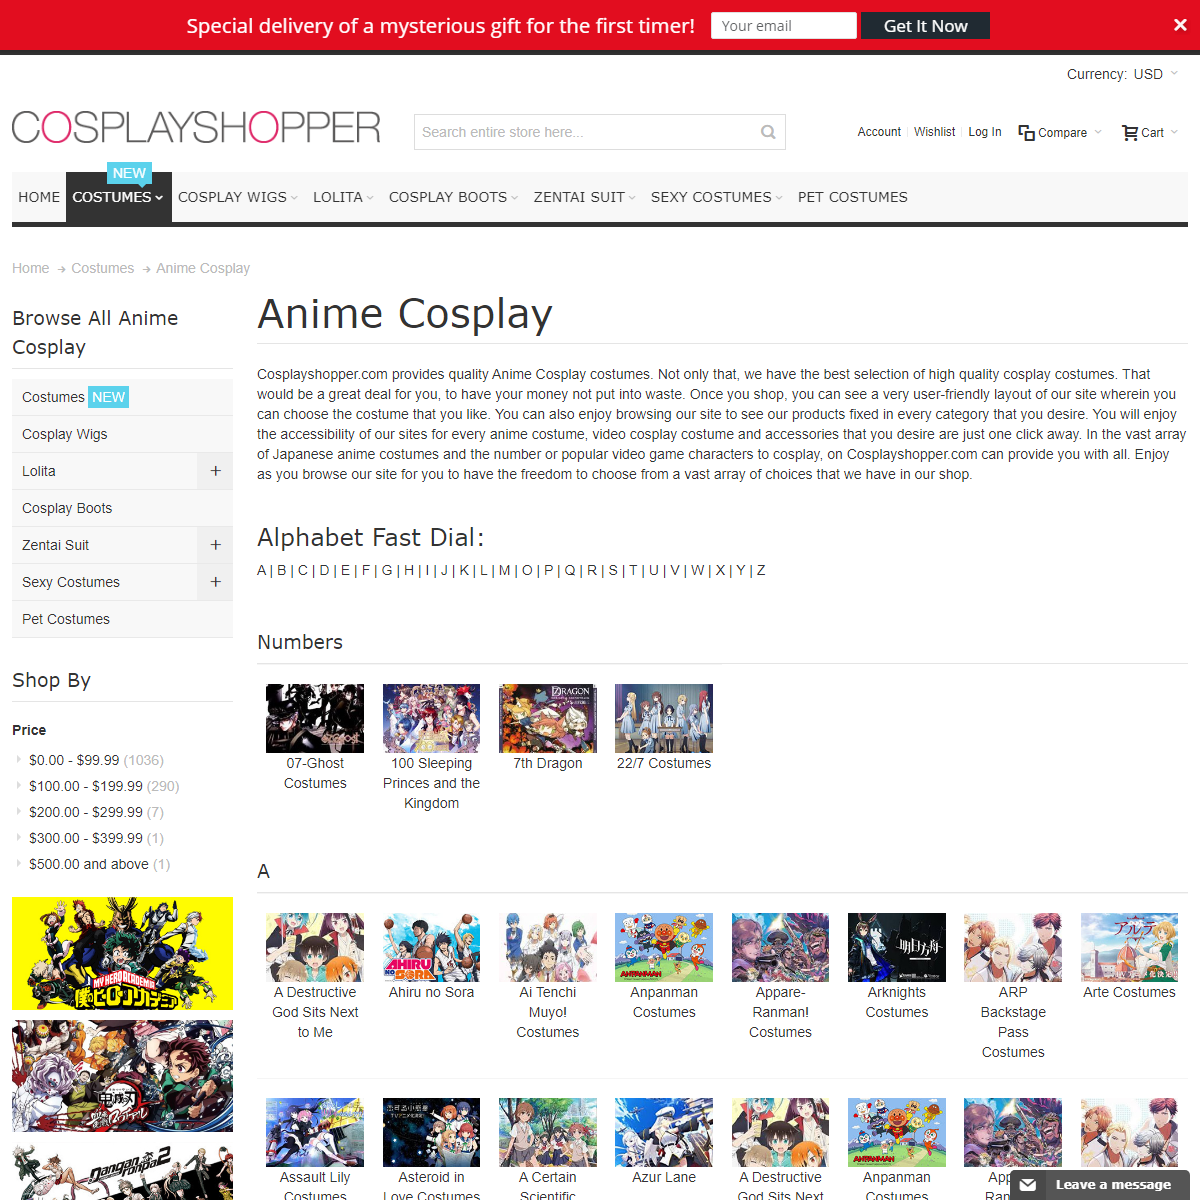 A complete backup of https://www.cosplayshopper.com/costumes/anime-costumes